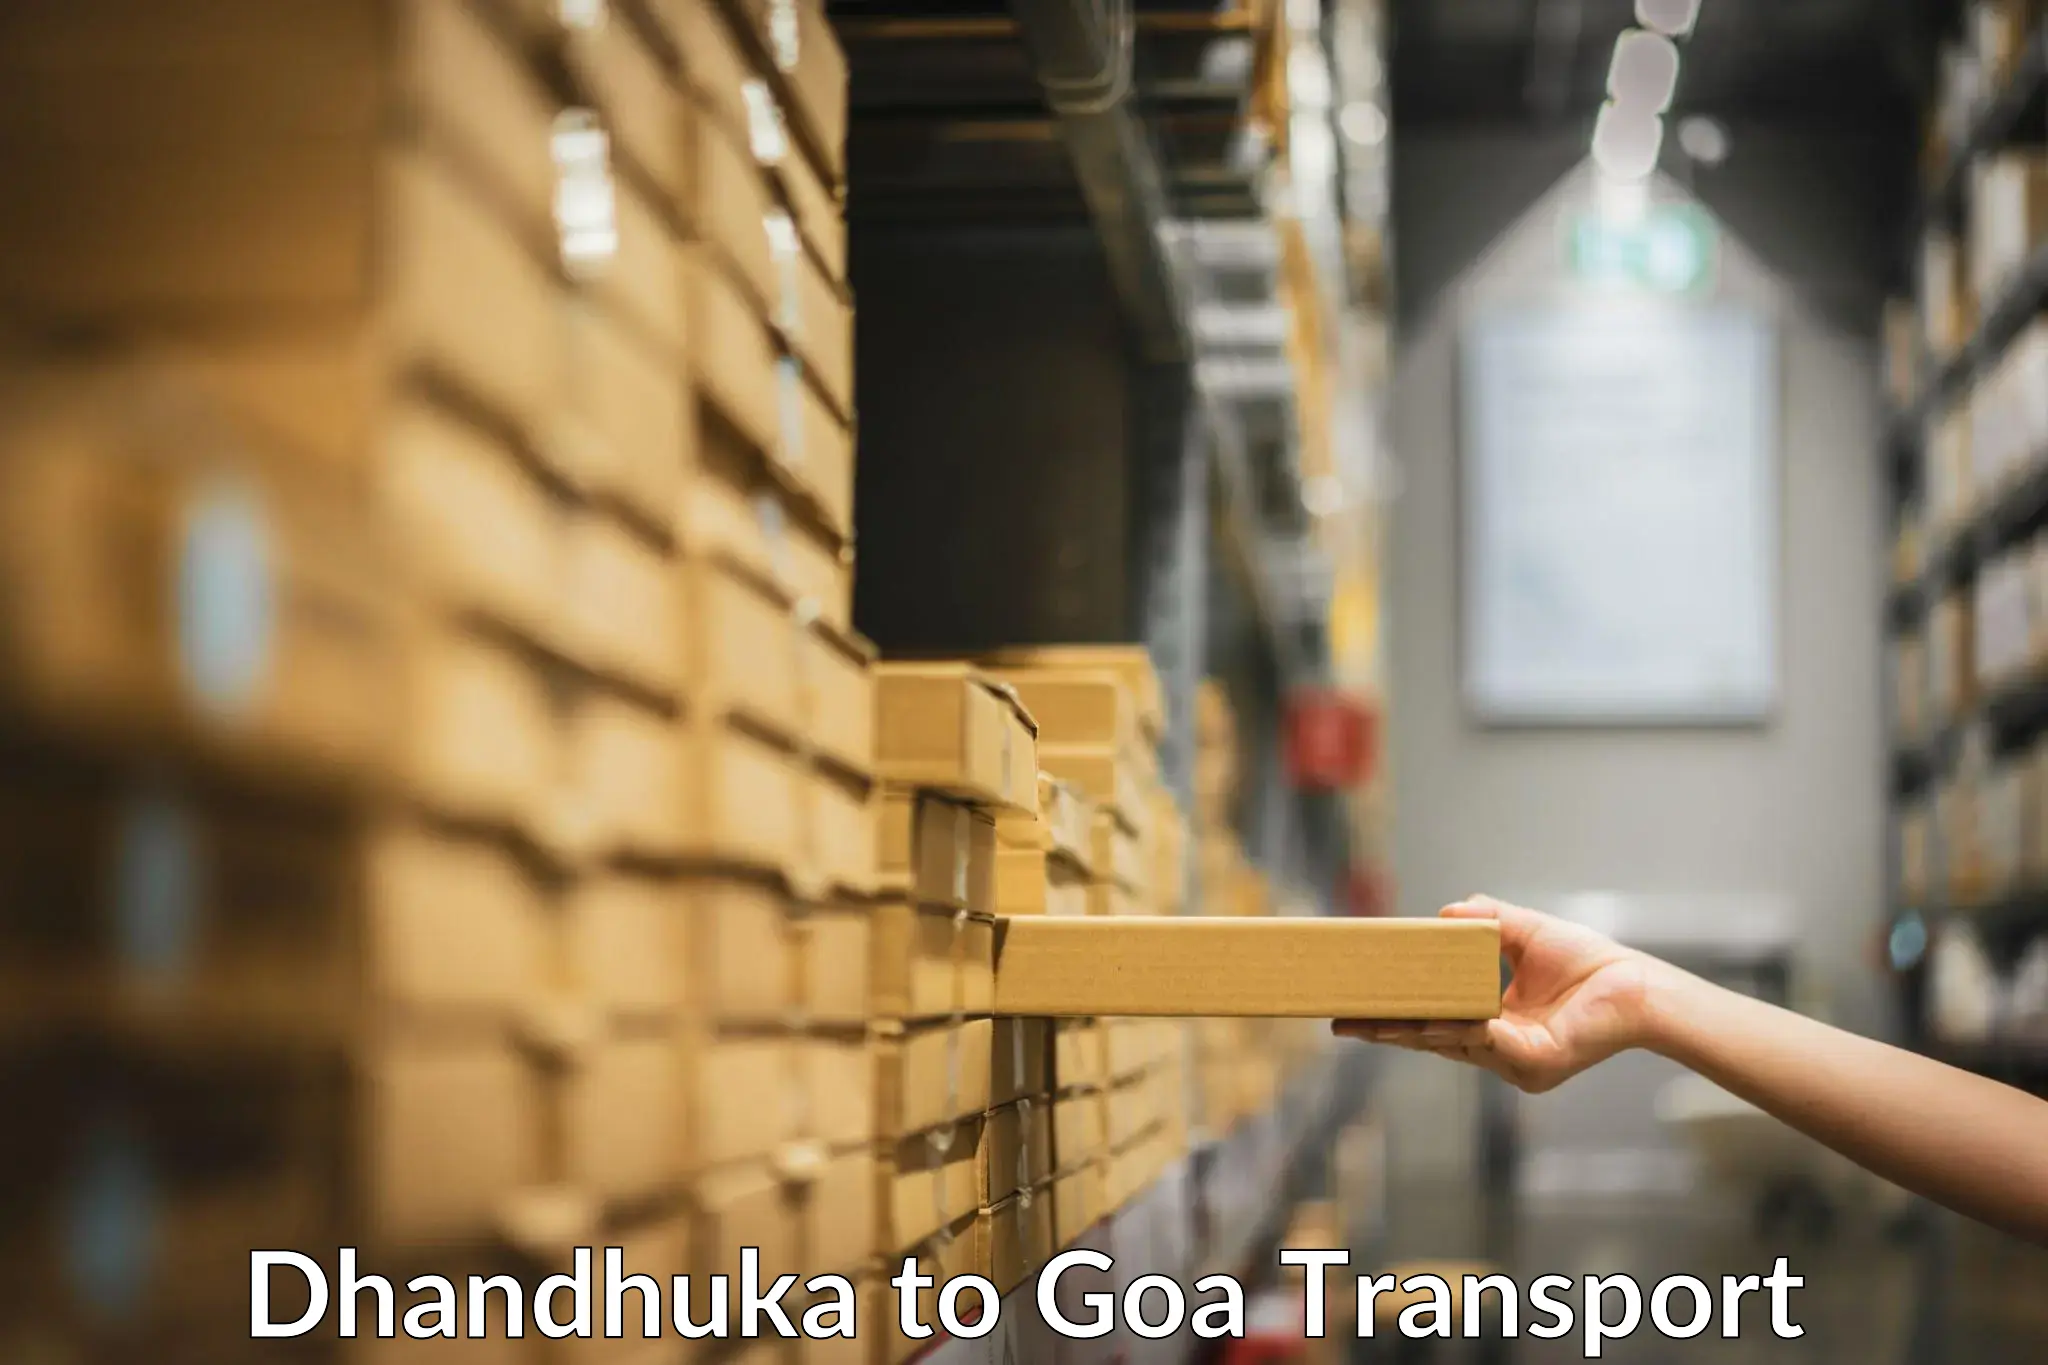 Nearby transport service Dhandhuka to Goa